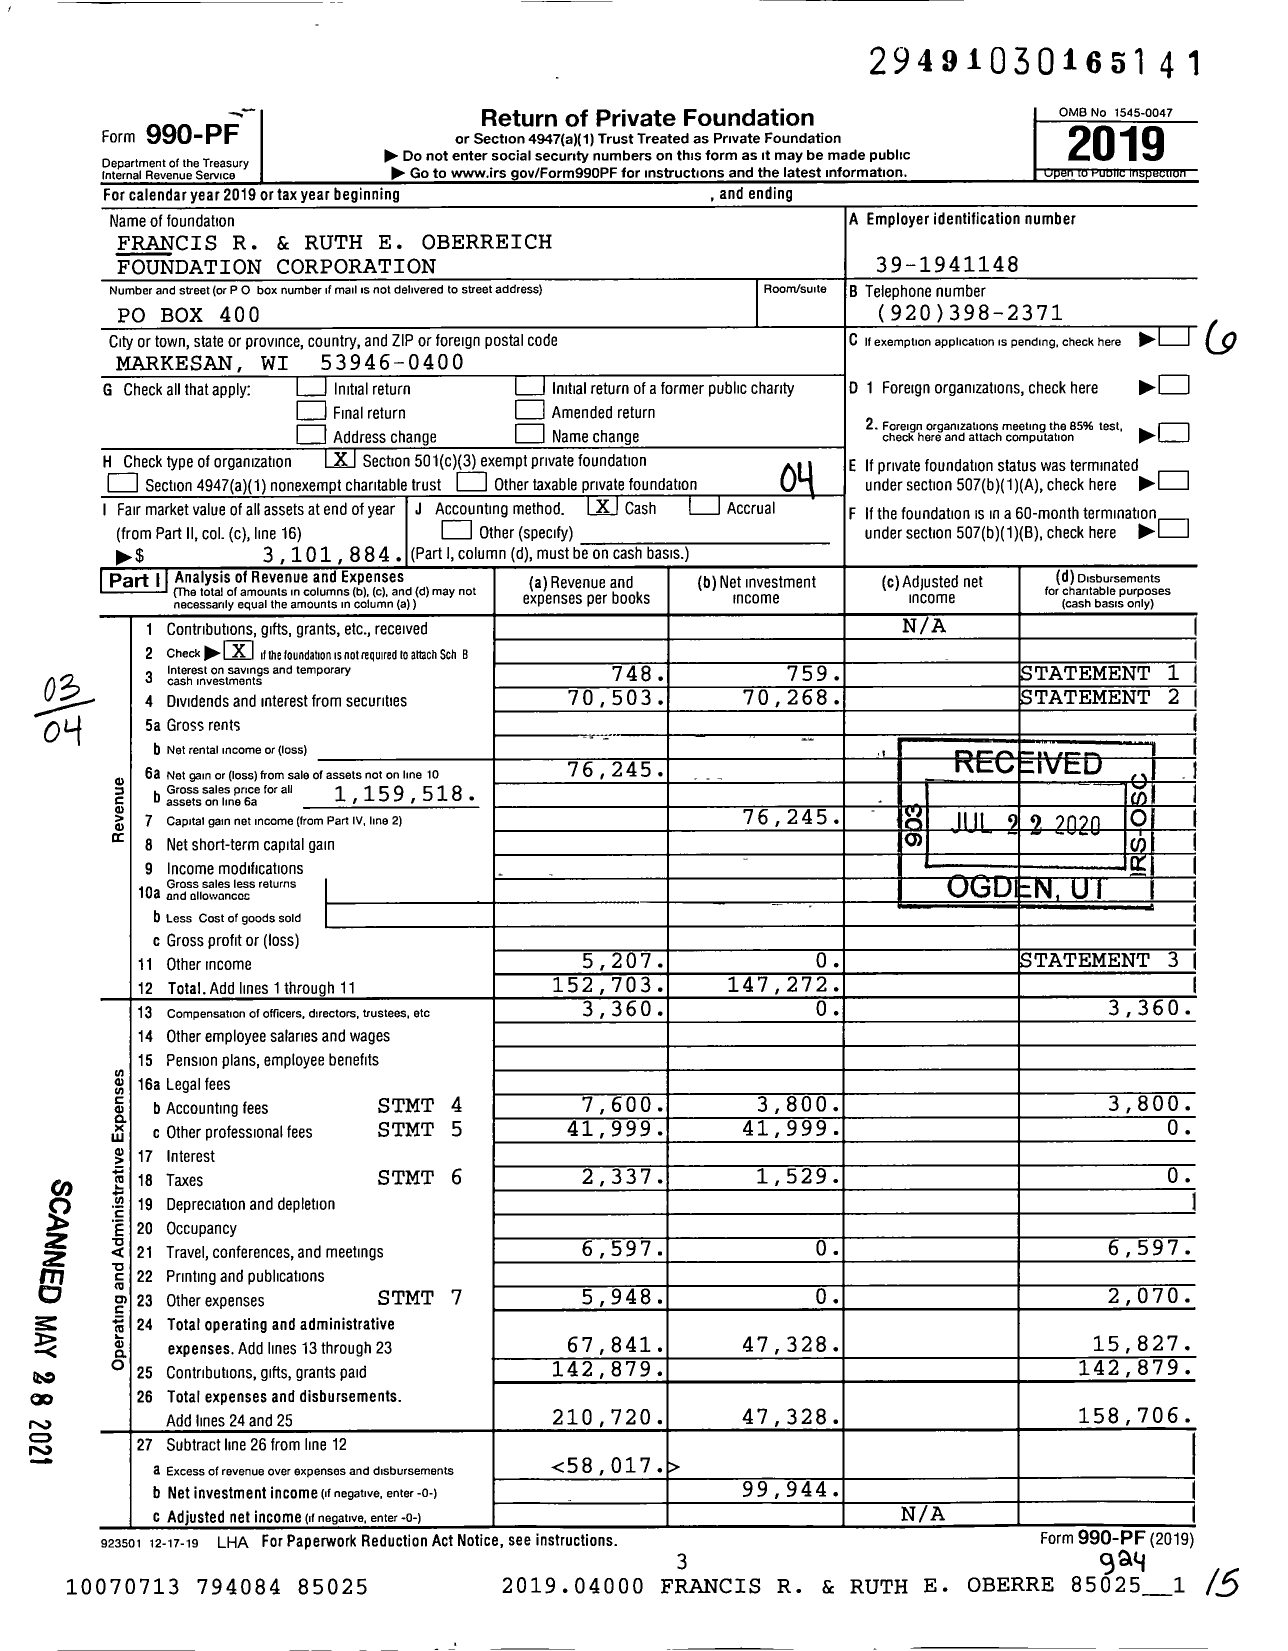 Image of first page of 2019 Form 990PF for Francis R and Ruth E Oberreich Foundation Corporation